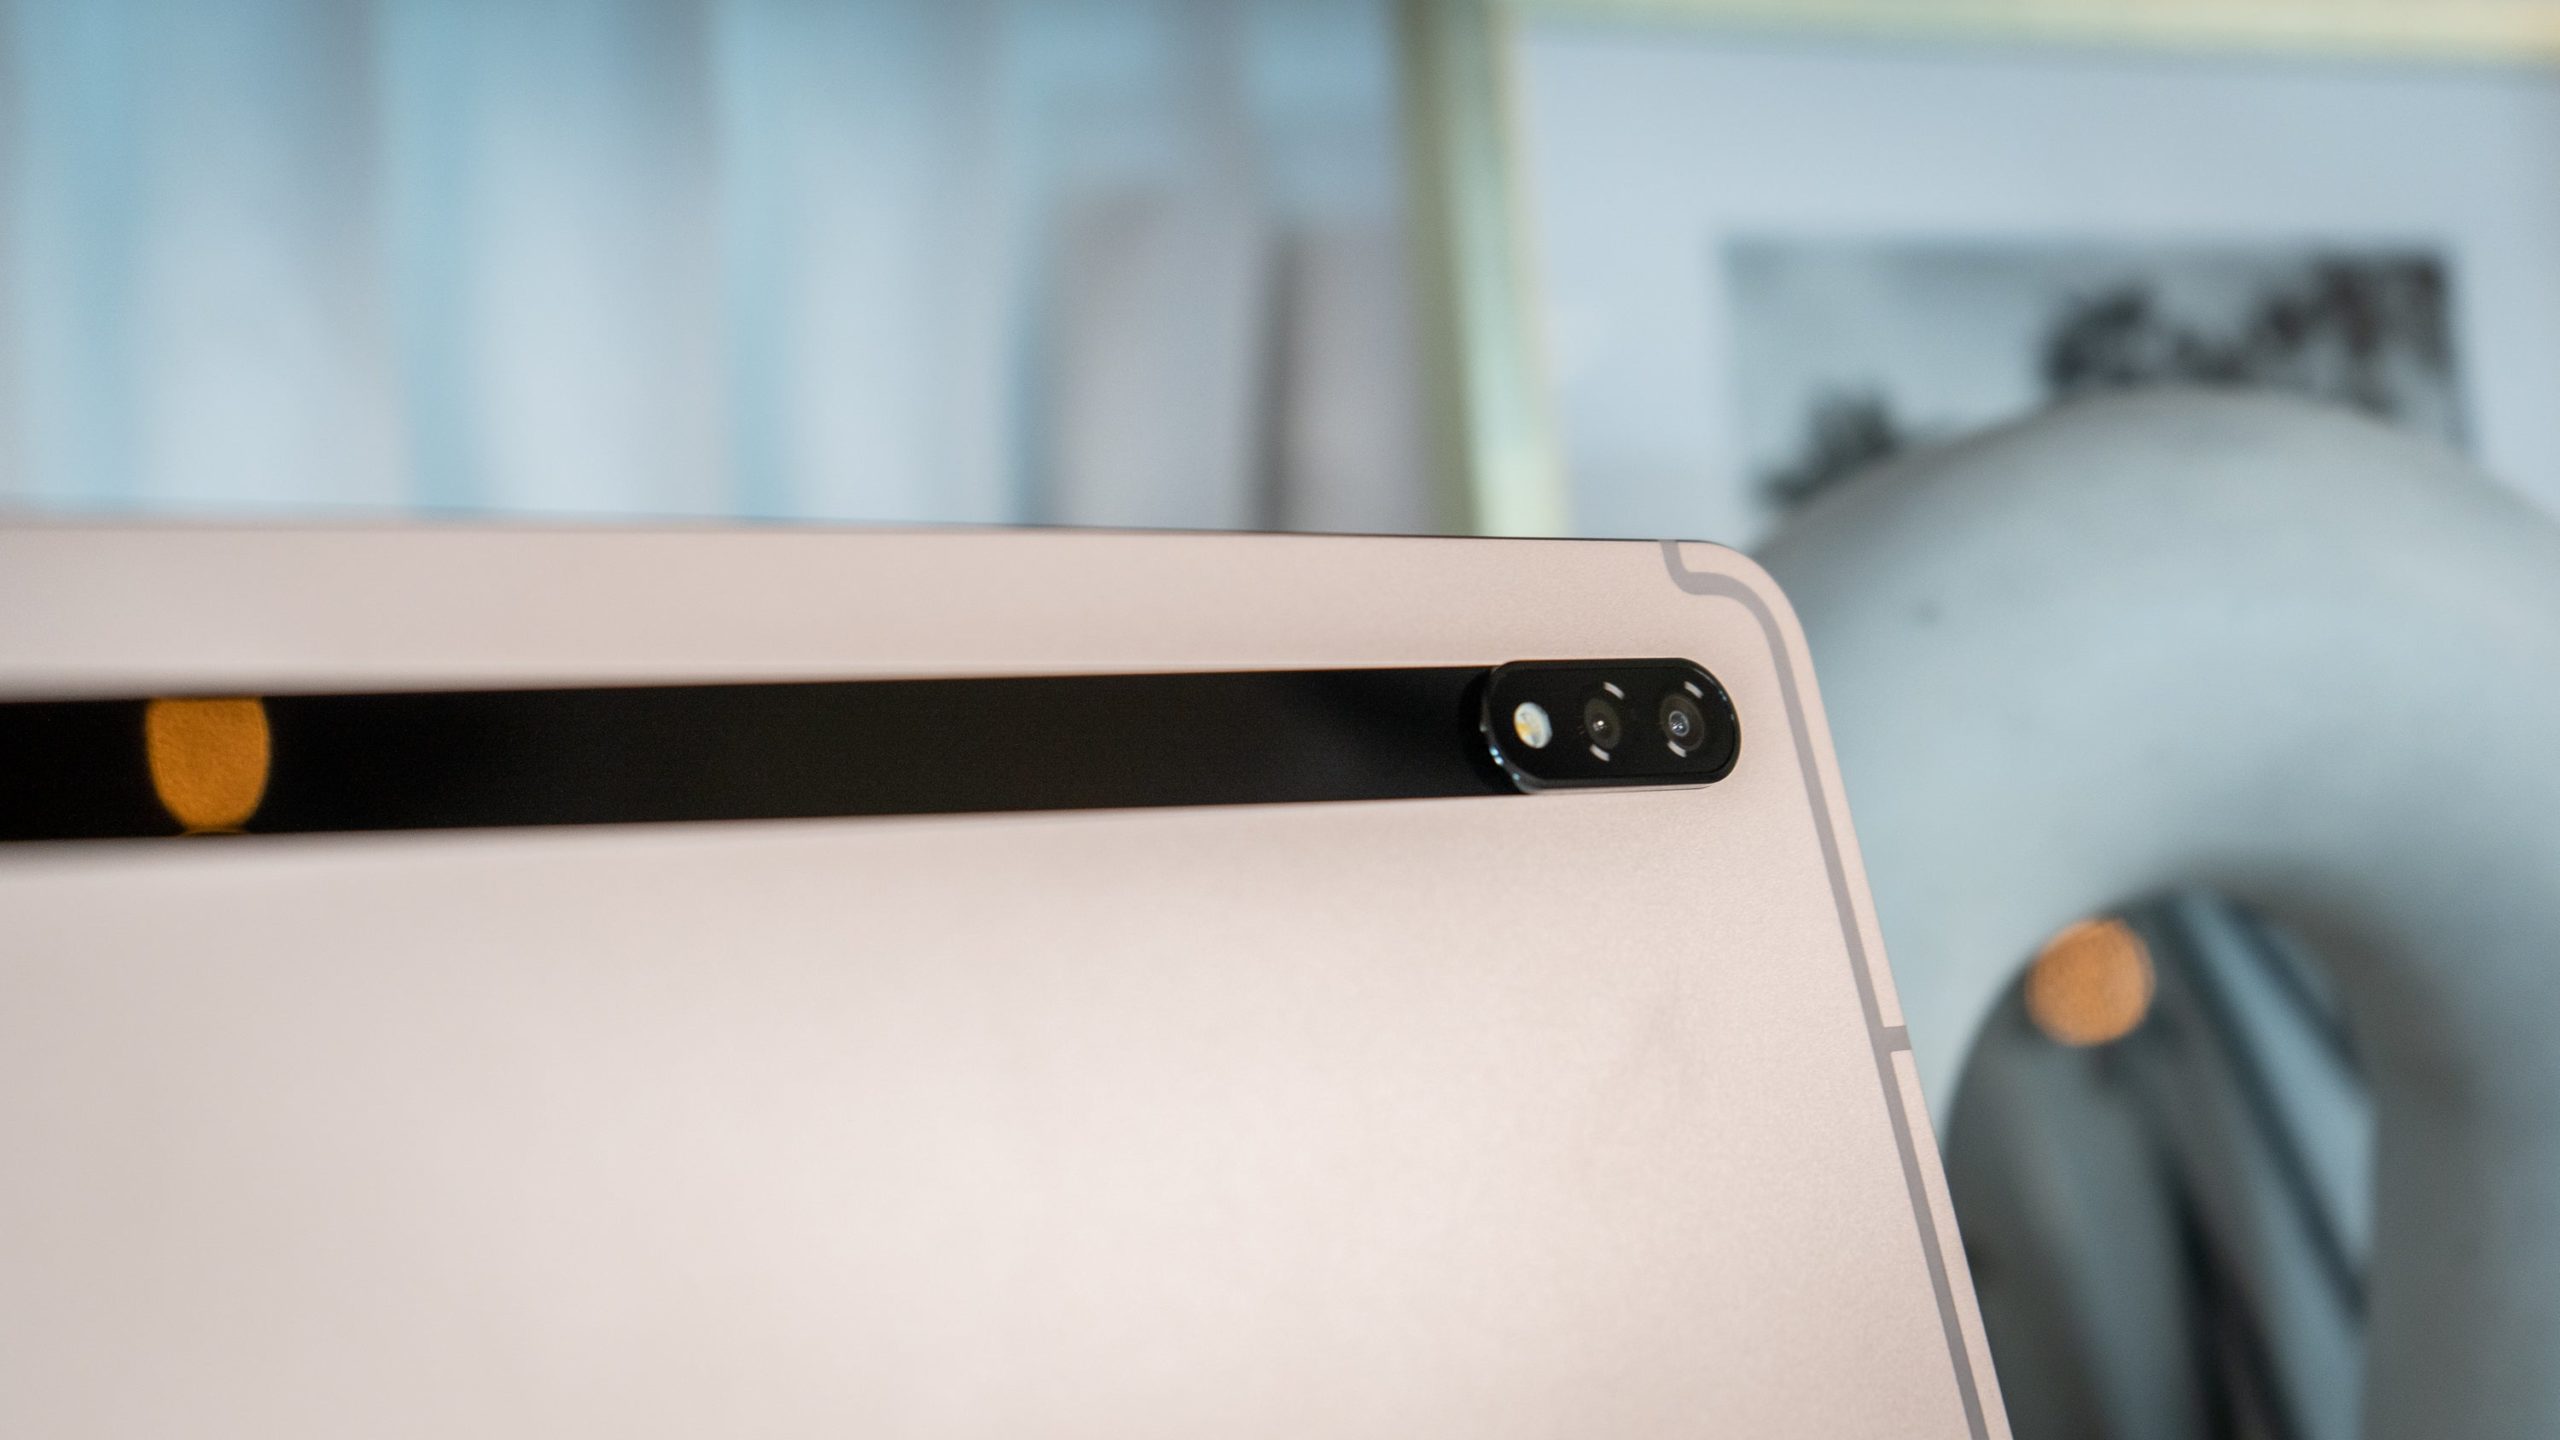 All of the Galaxy Tab S8 models have a dual-lens rear camera array. (Photo: Florence Ion/Gizmodo)